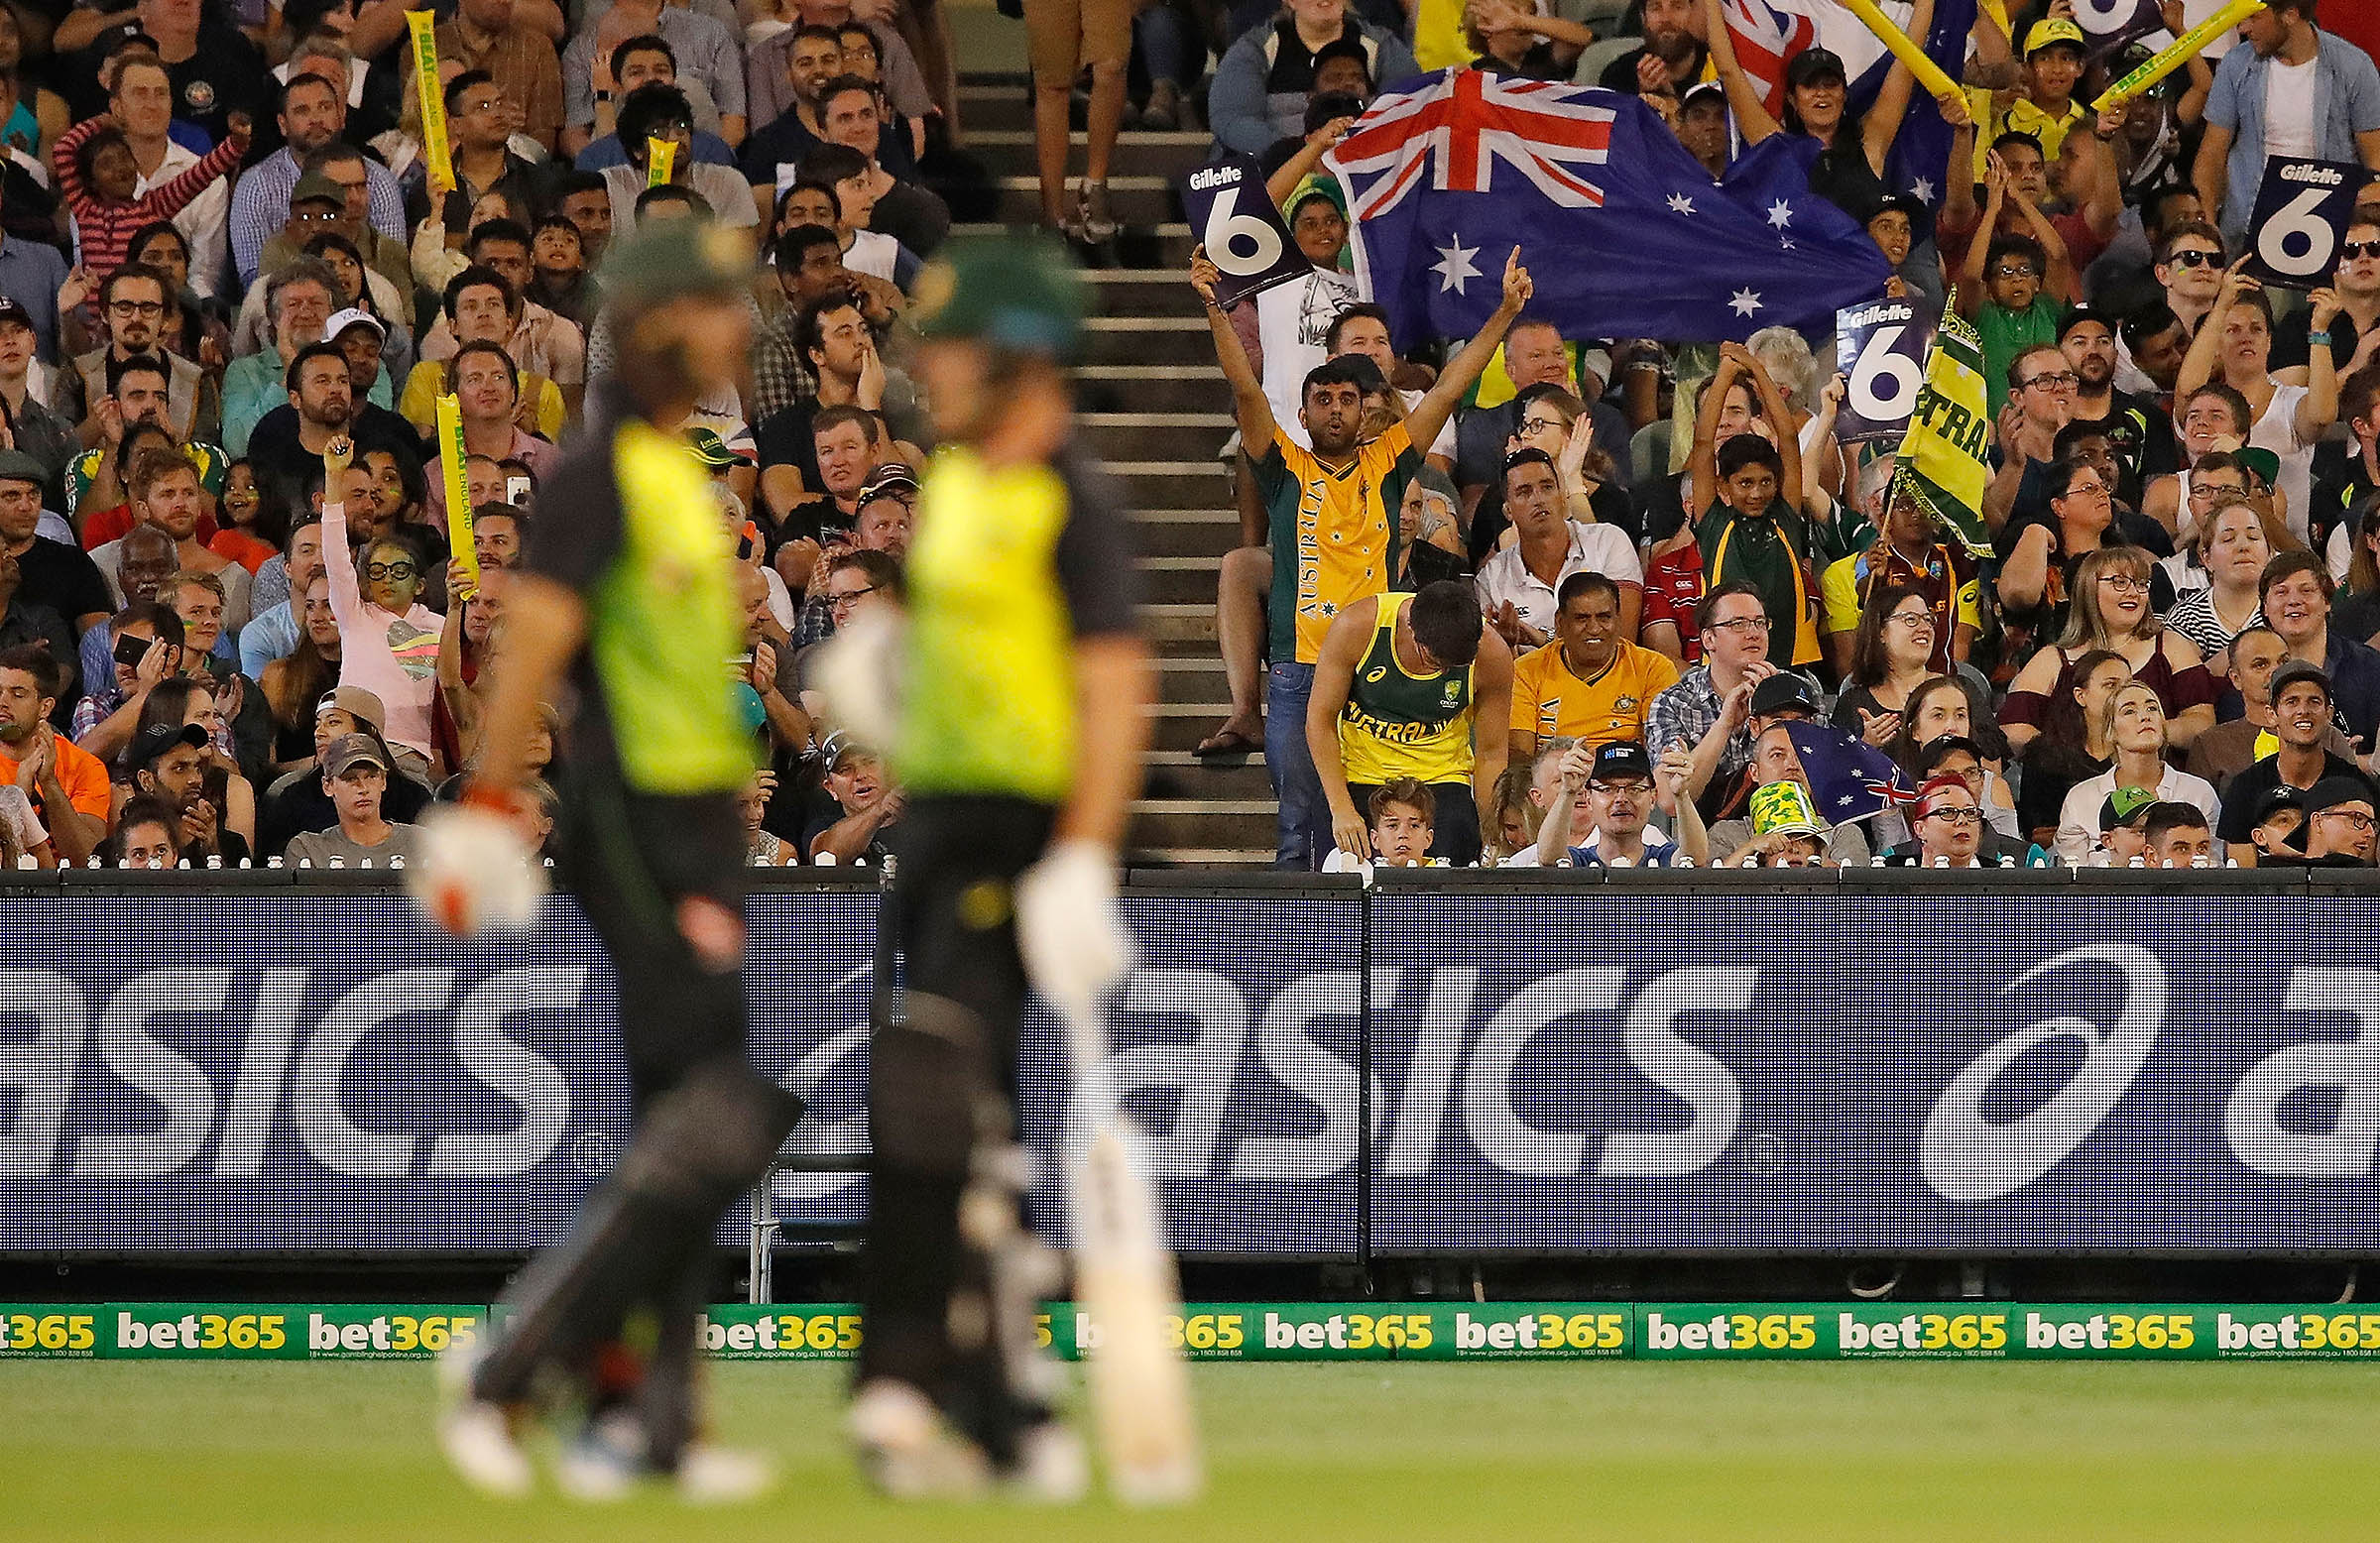 MCG has seen more than 55,000 tickets been pre-sold for the Ind vs Aus clash | Getty